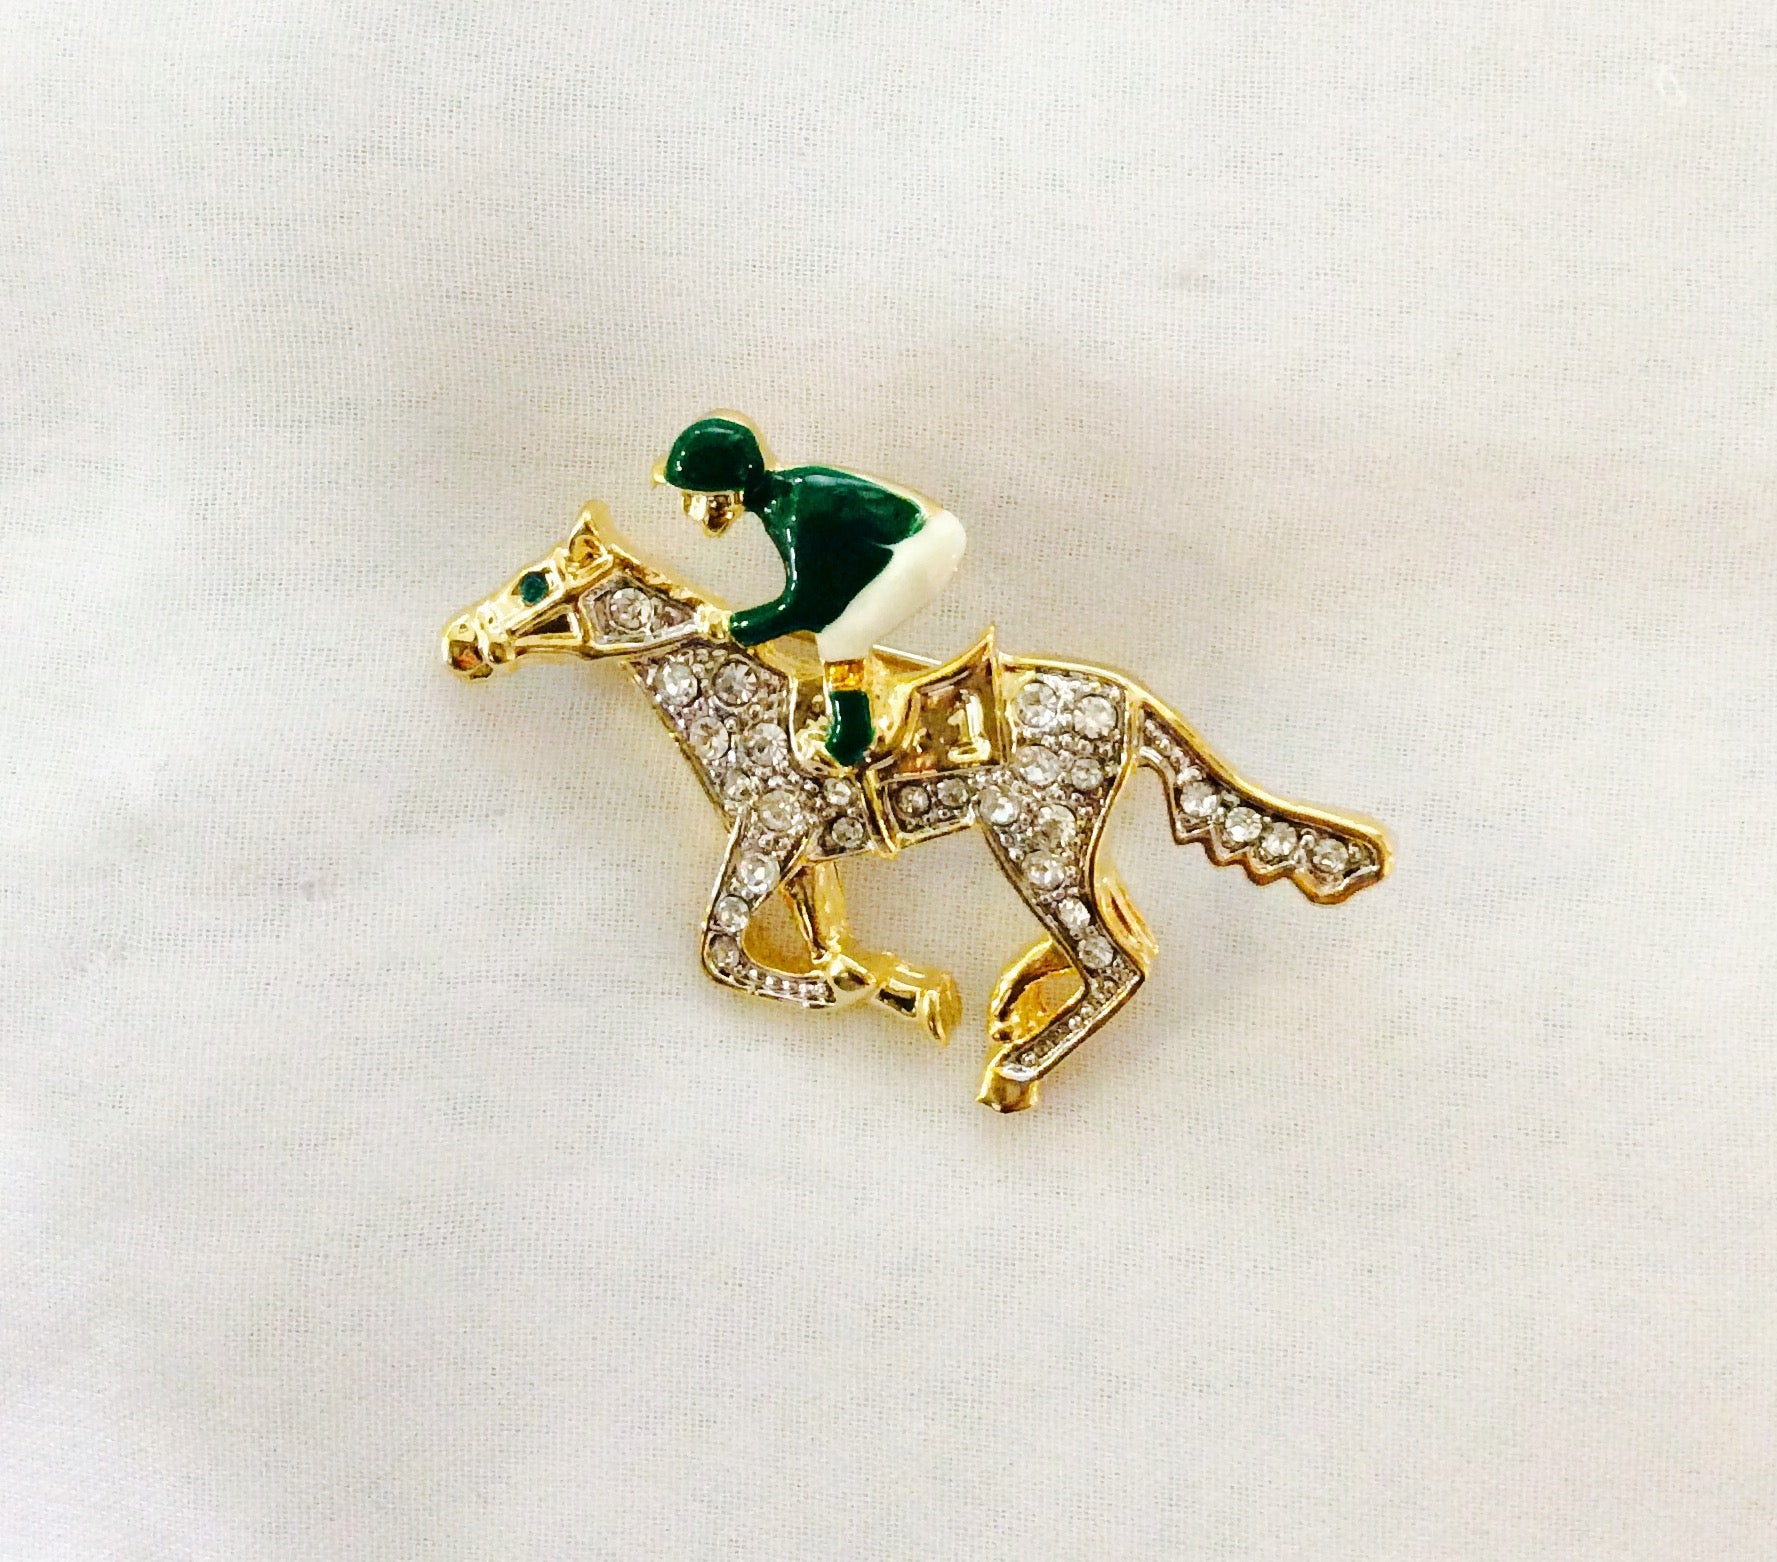 Horse Rider Pin #38-1444GN